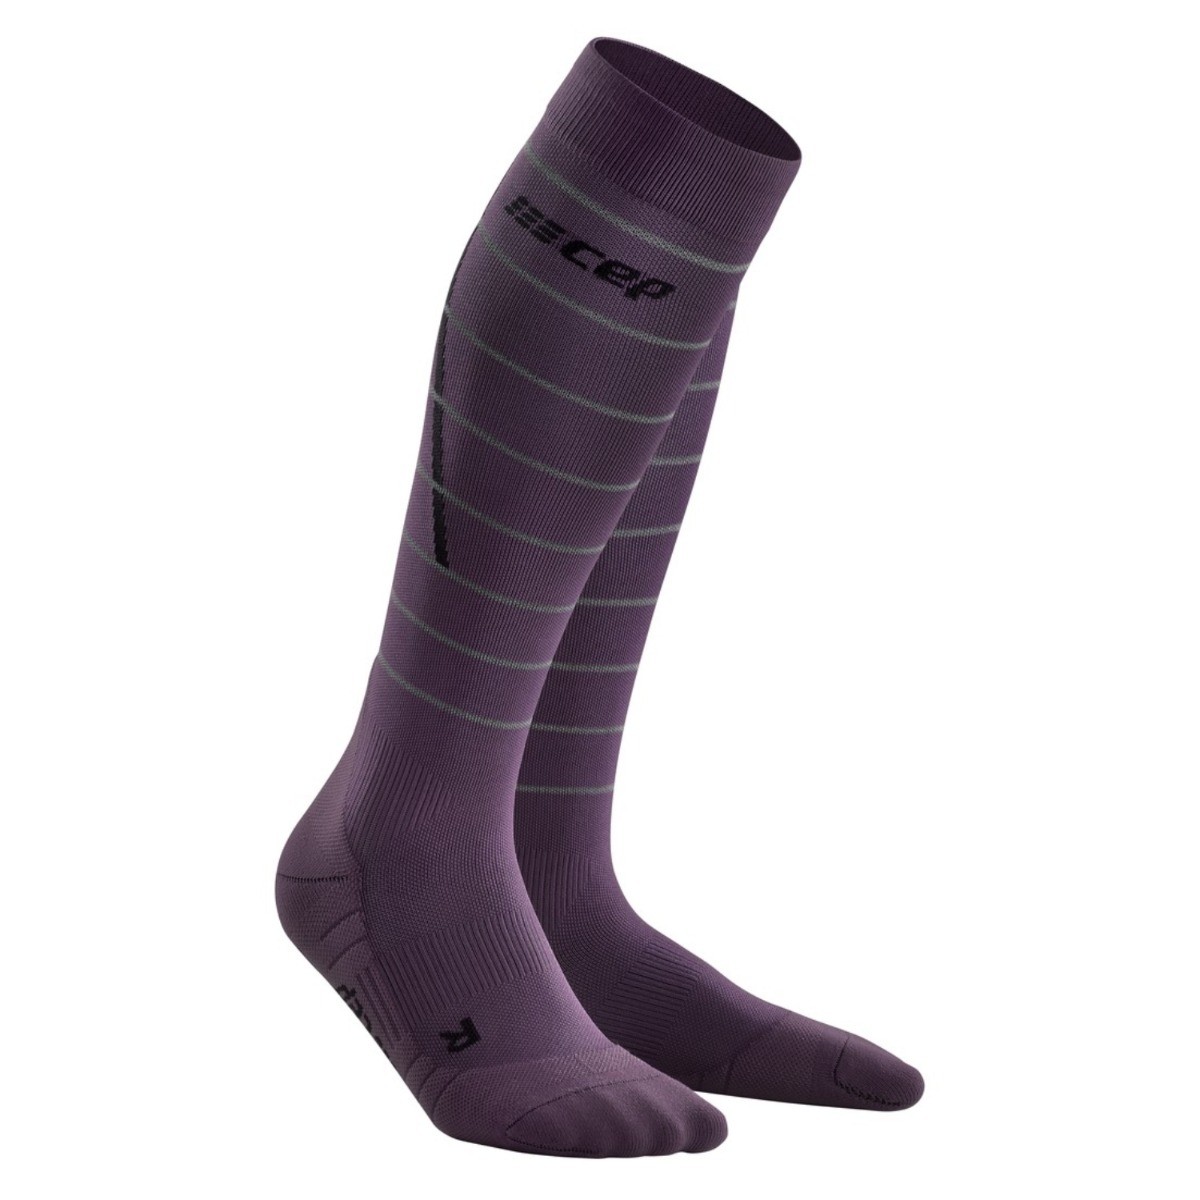 Buy Reflective Compression Socks for women